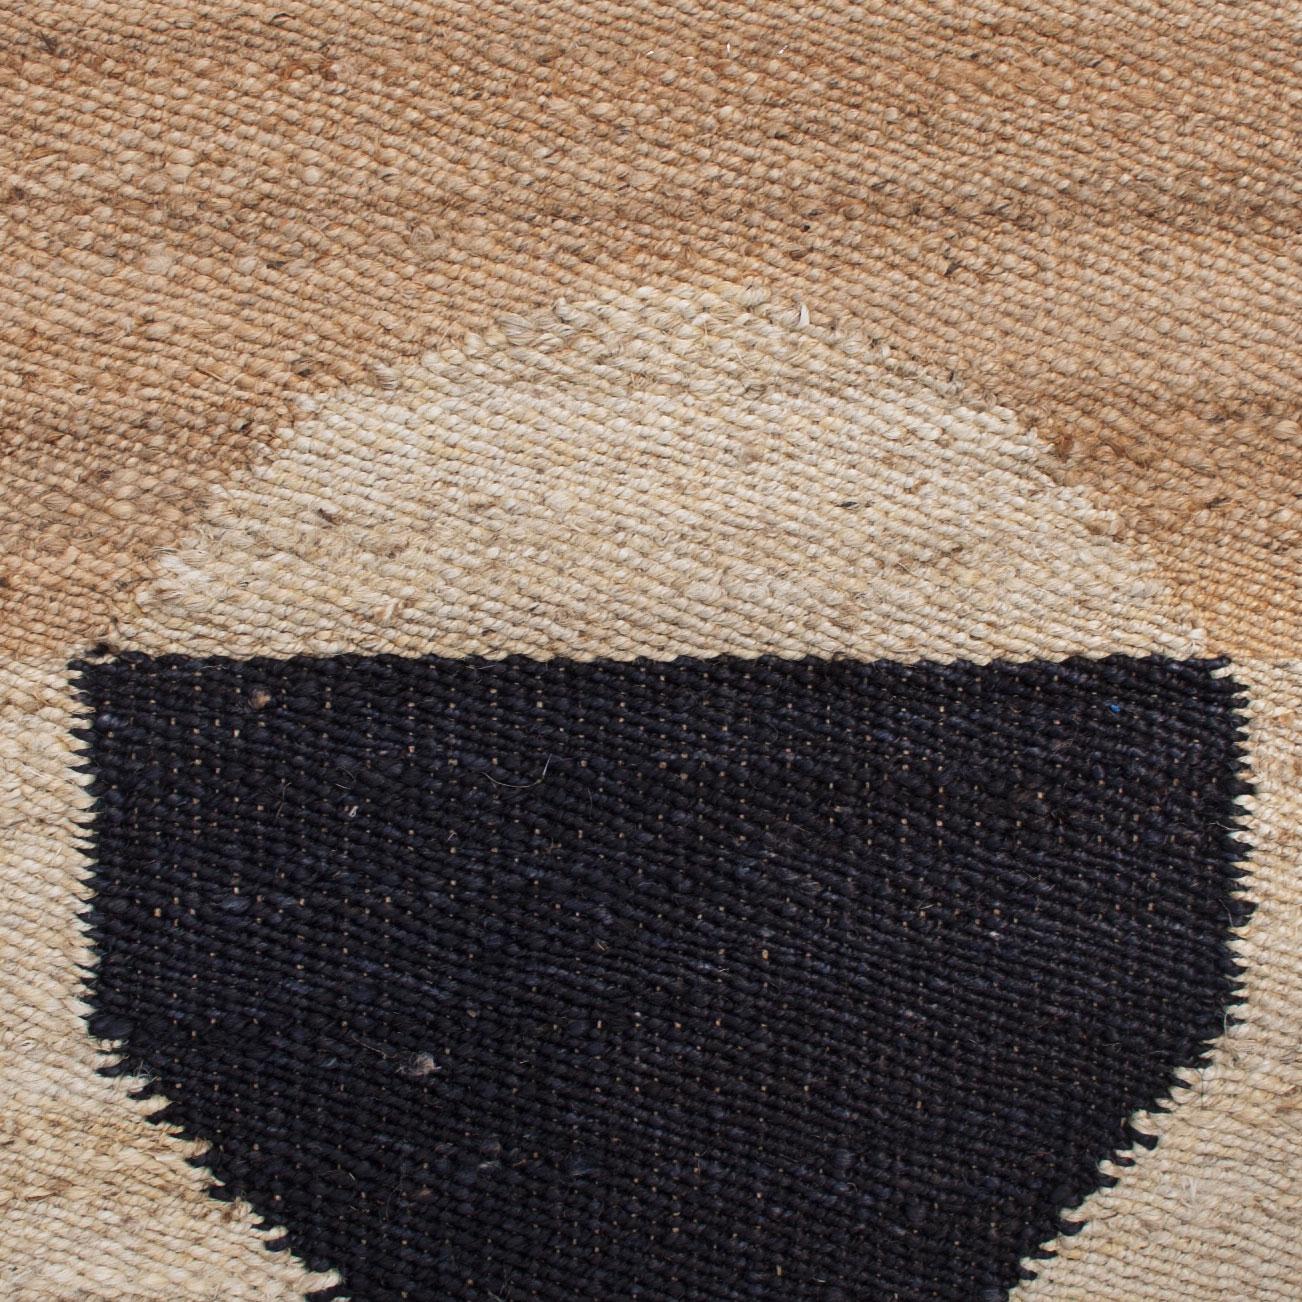 This modern area rug has been ethically handwoven in the finest jute yarns by artisans in Rajasthan, India, using a traditional weaving technique which is native to this region.

The purchase of this handcrafted rug helps to support the artisans